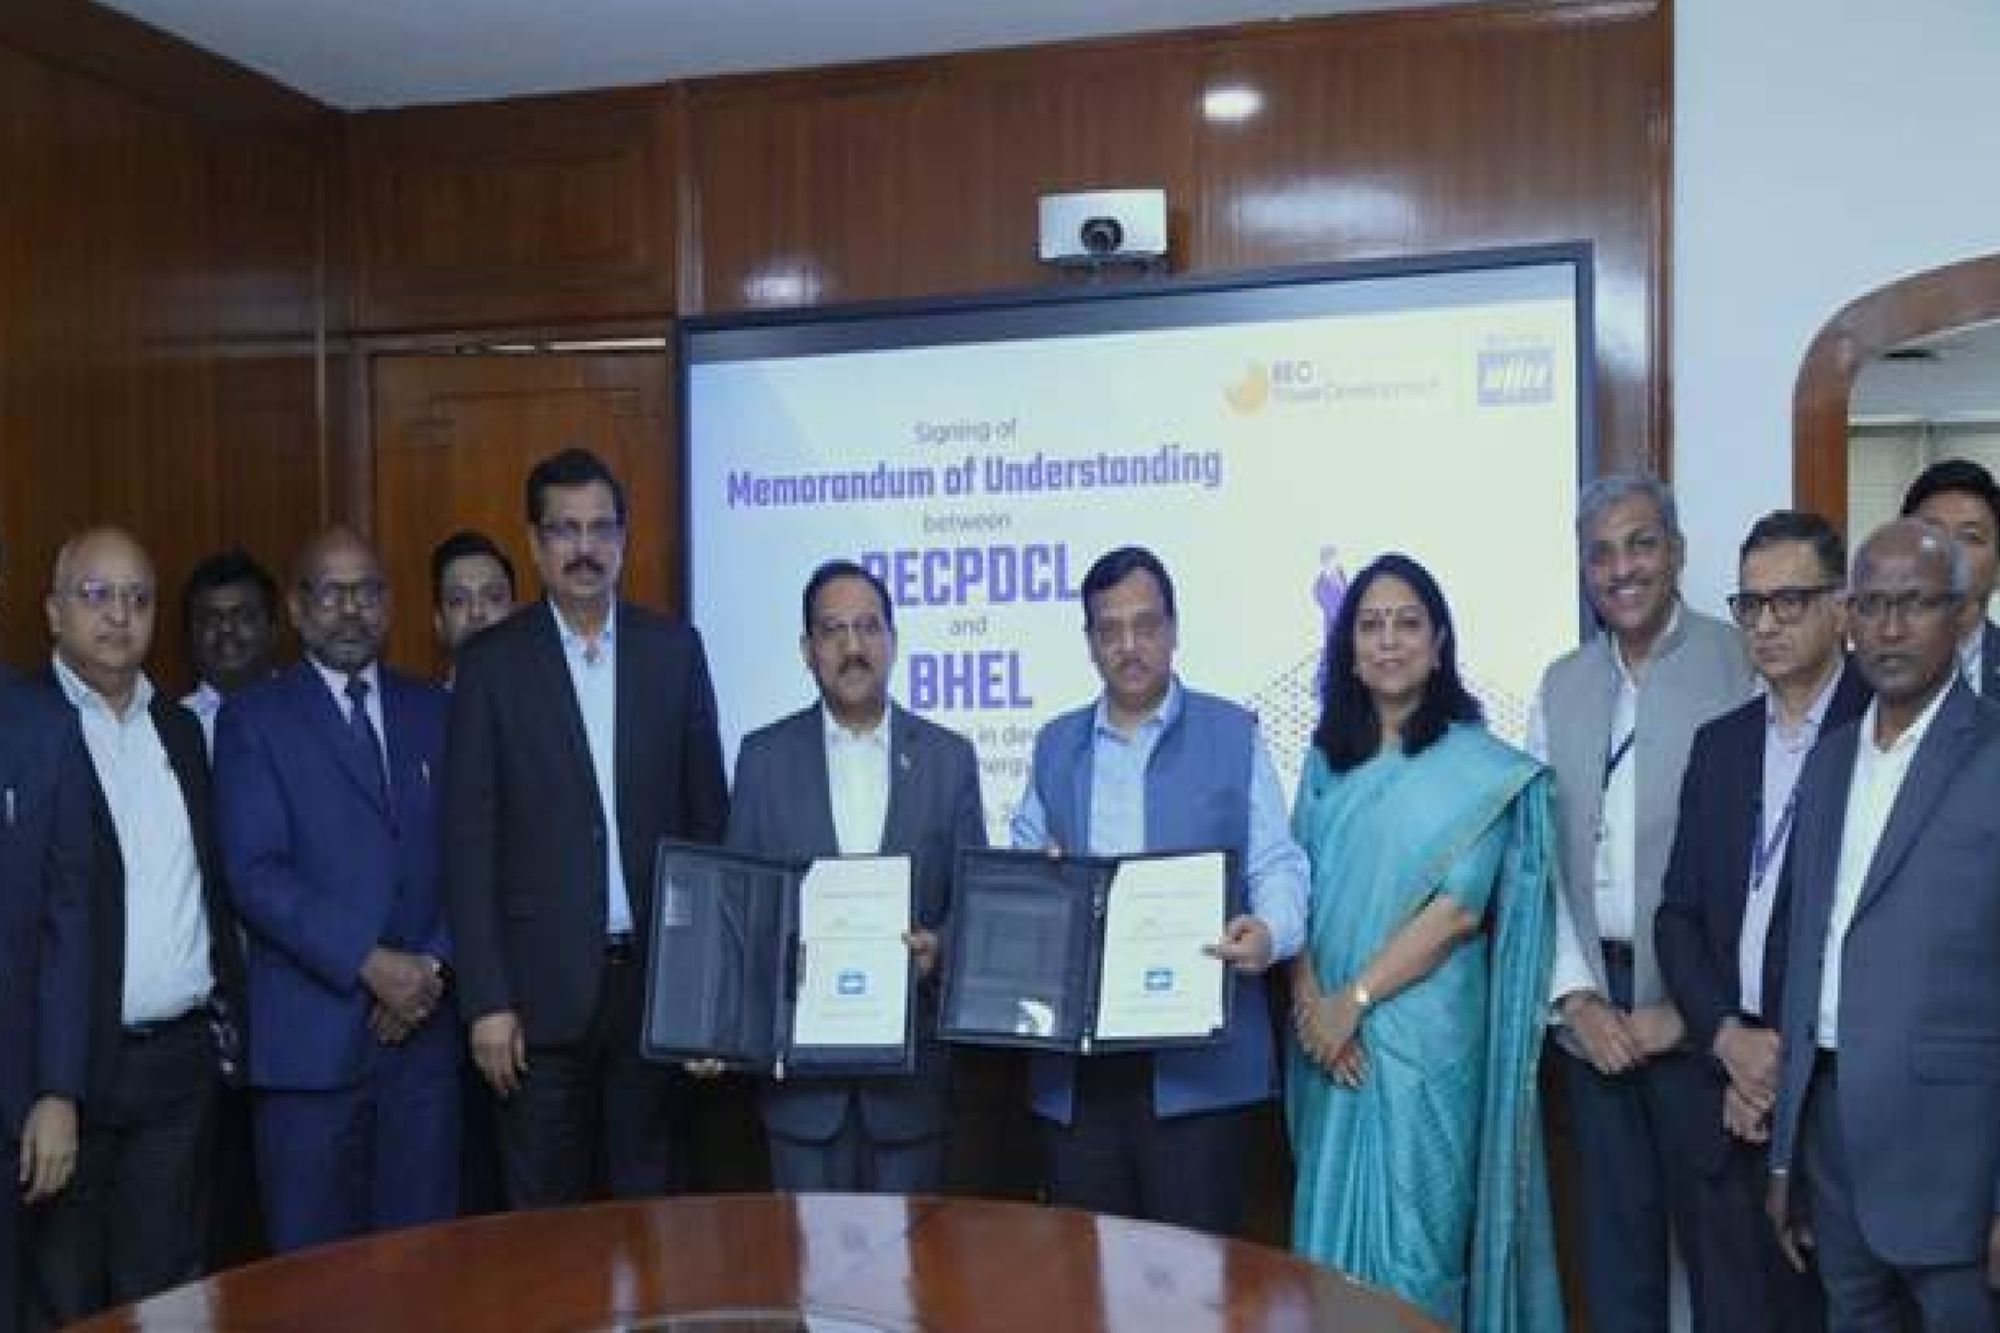 REC and BHEL join forces for utility-scale renewable energy projects across India